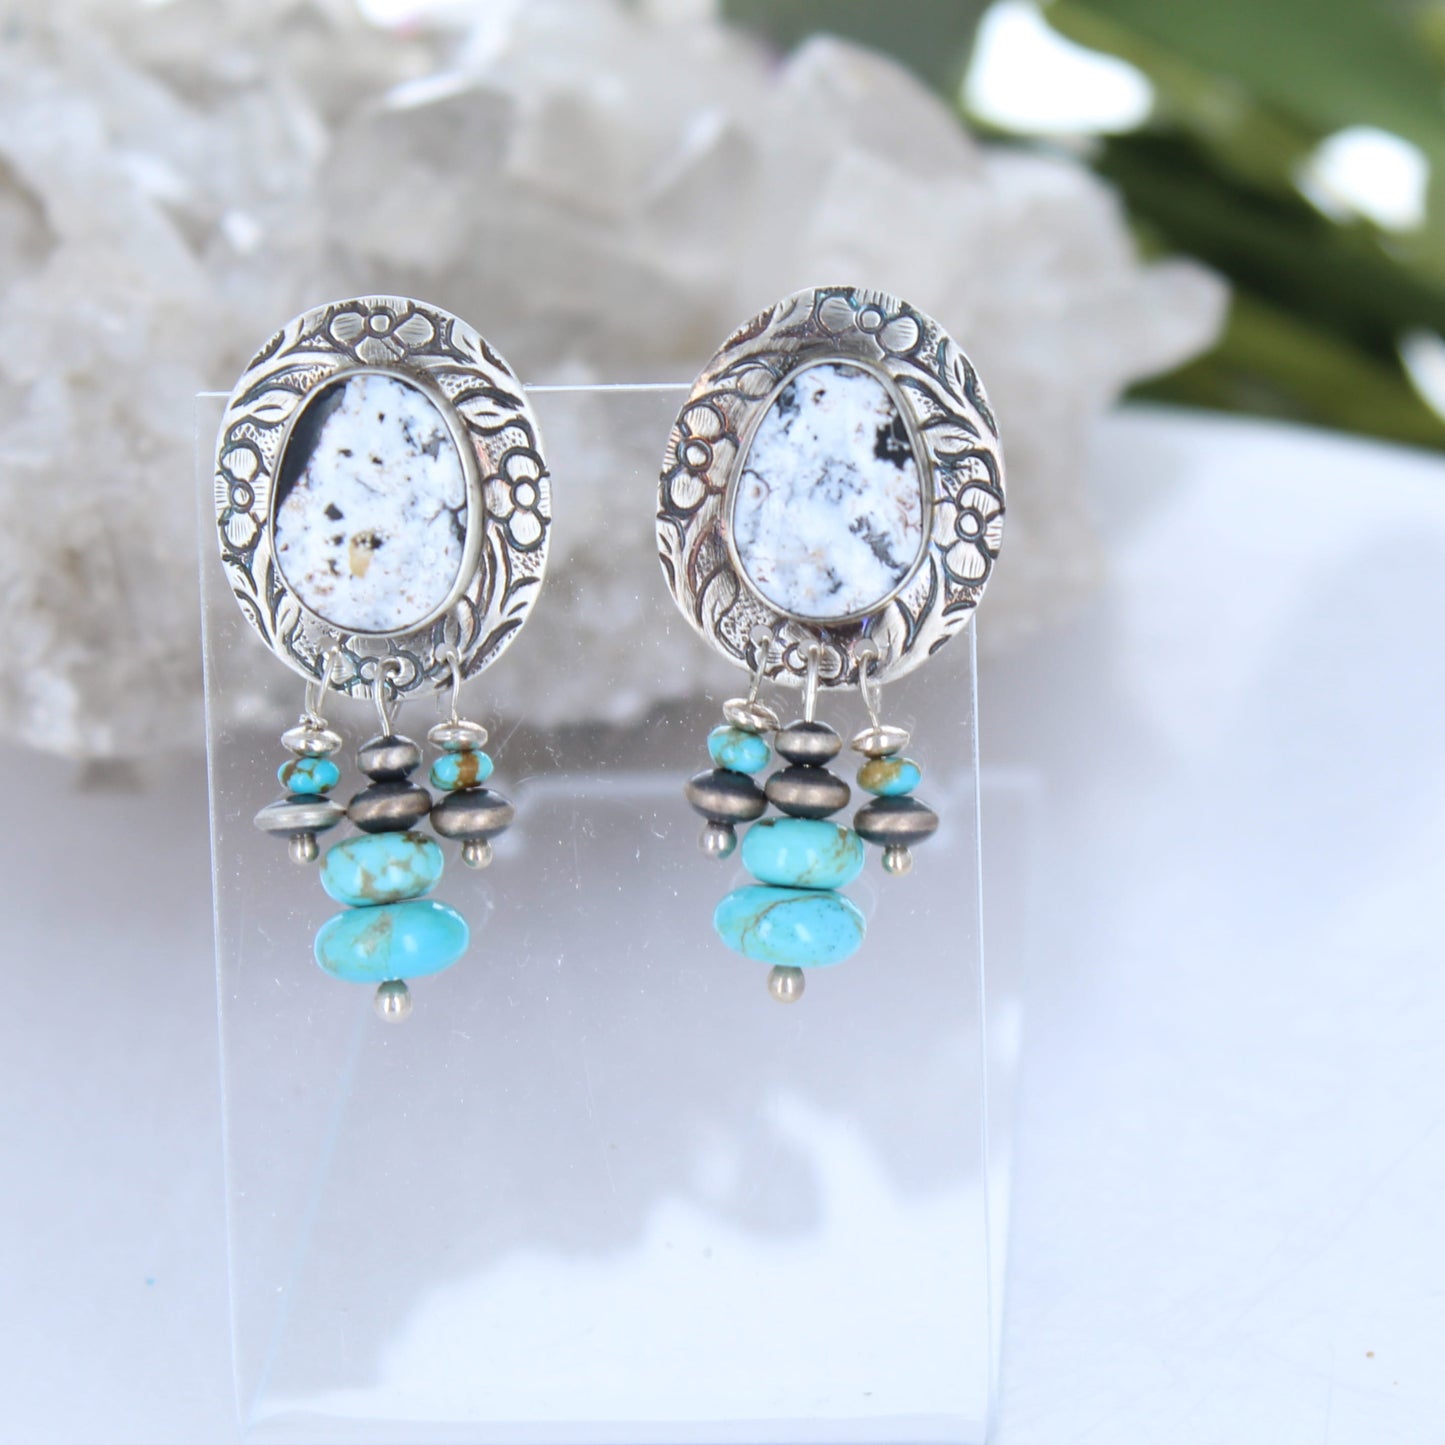 Dramatic White Buffalo and #8 mine Turquoise Earrings Patterned Sterling